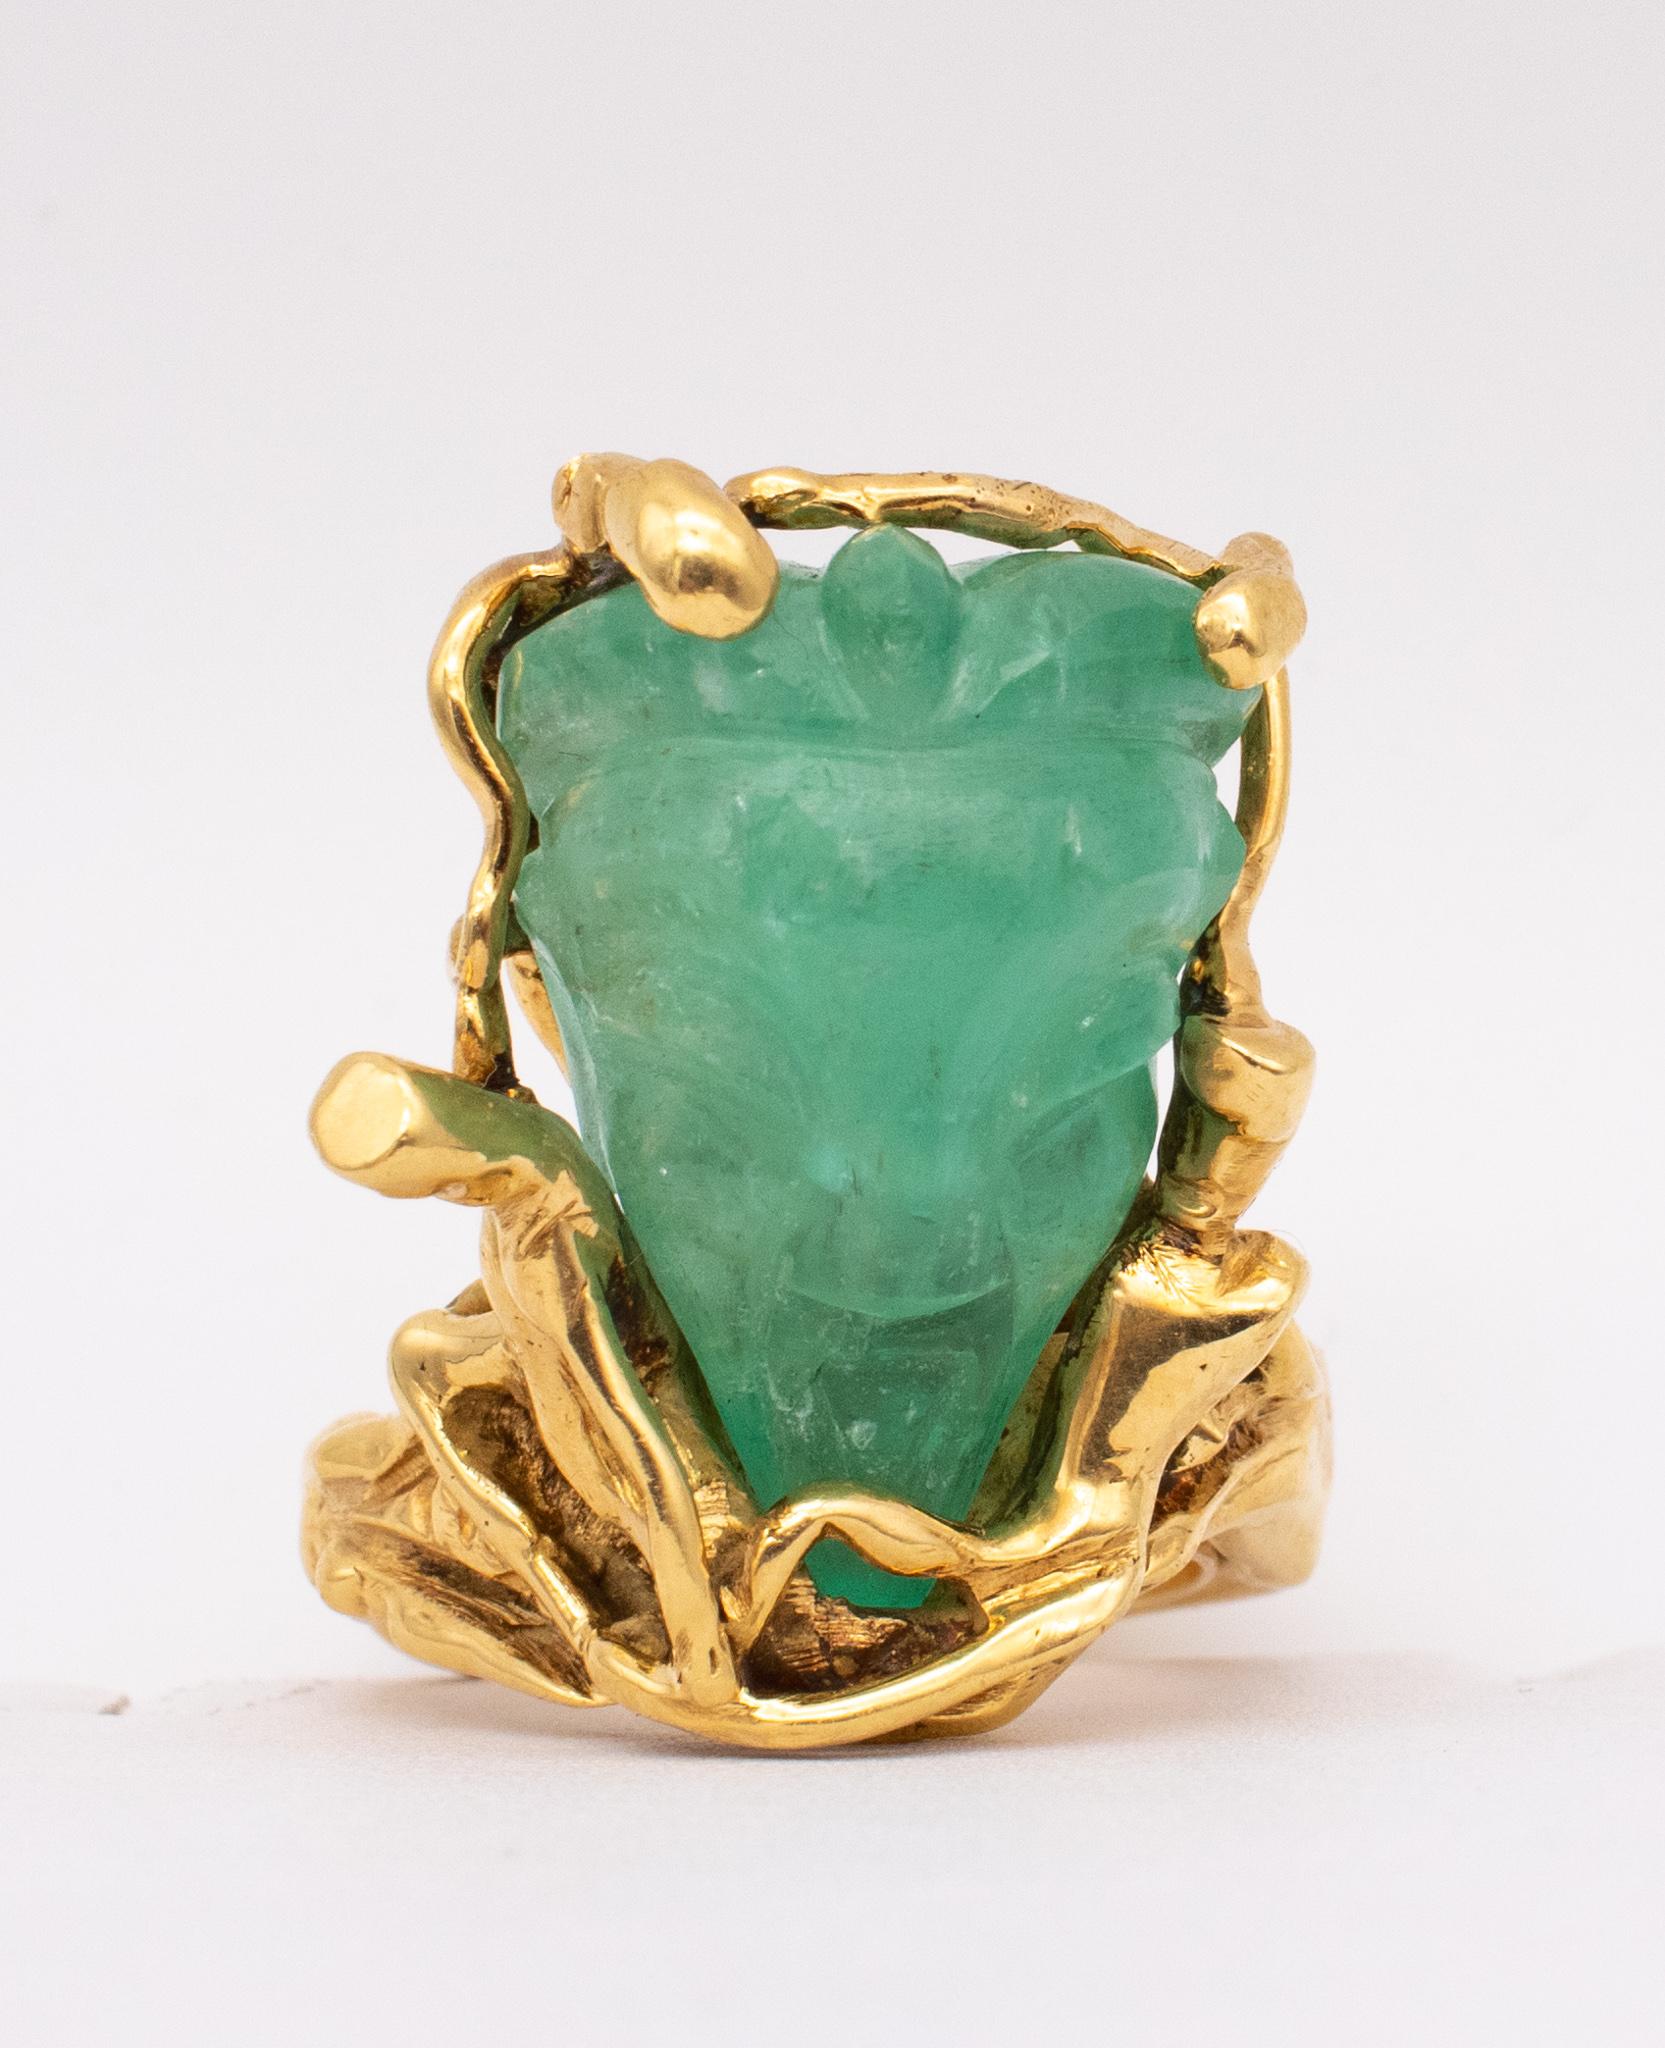 Women's or Men's Eric De Kolb 1960 Rare Statement Ring in 18Kt Gold with 28.53 Cts Carved Emerald